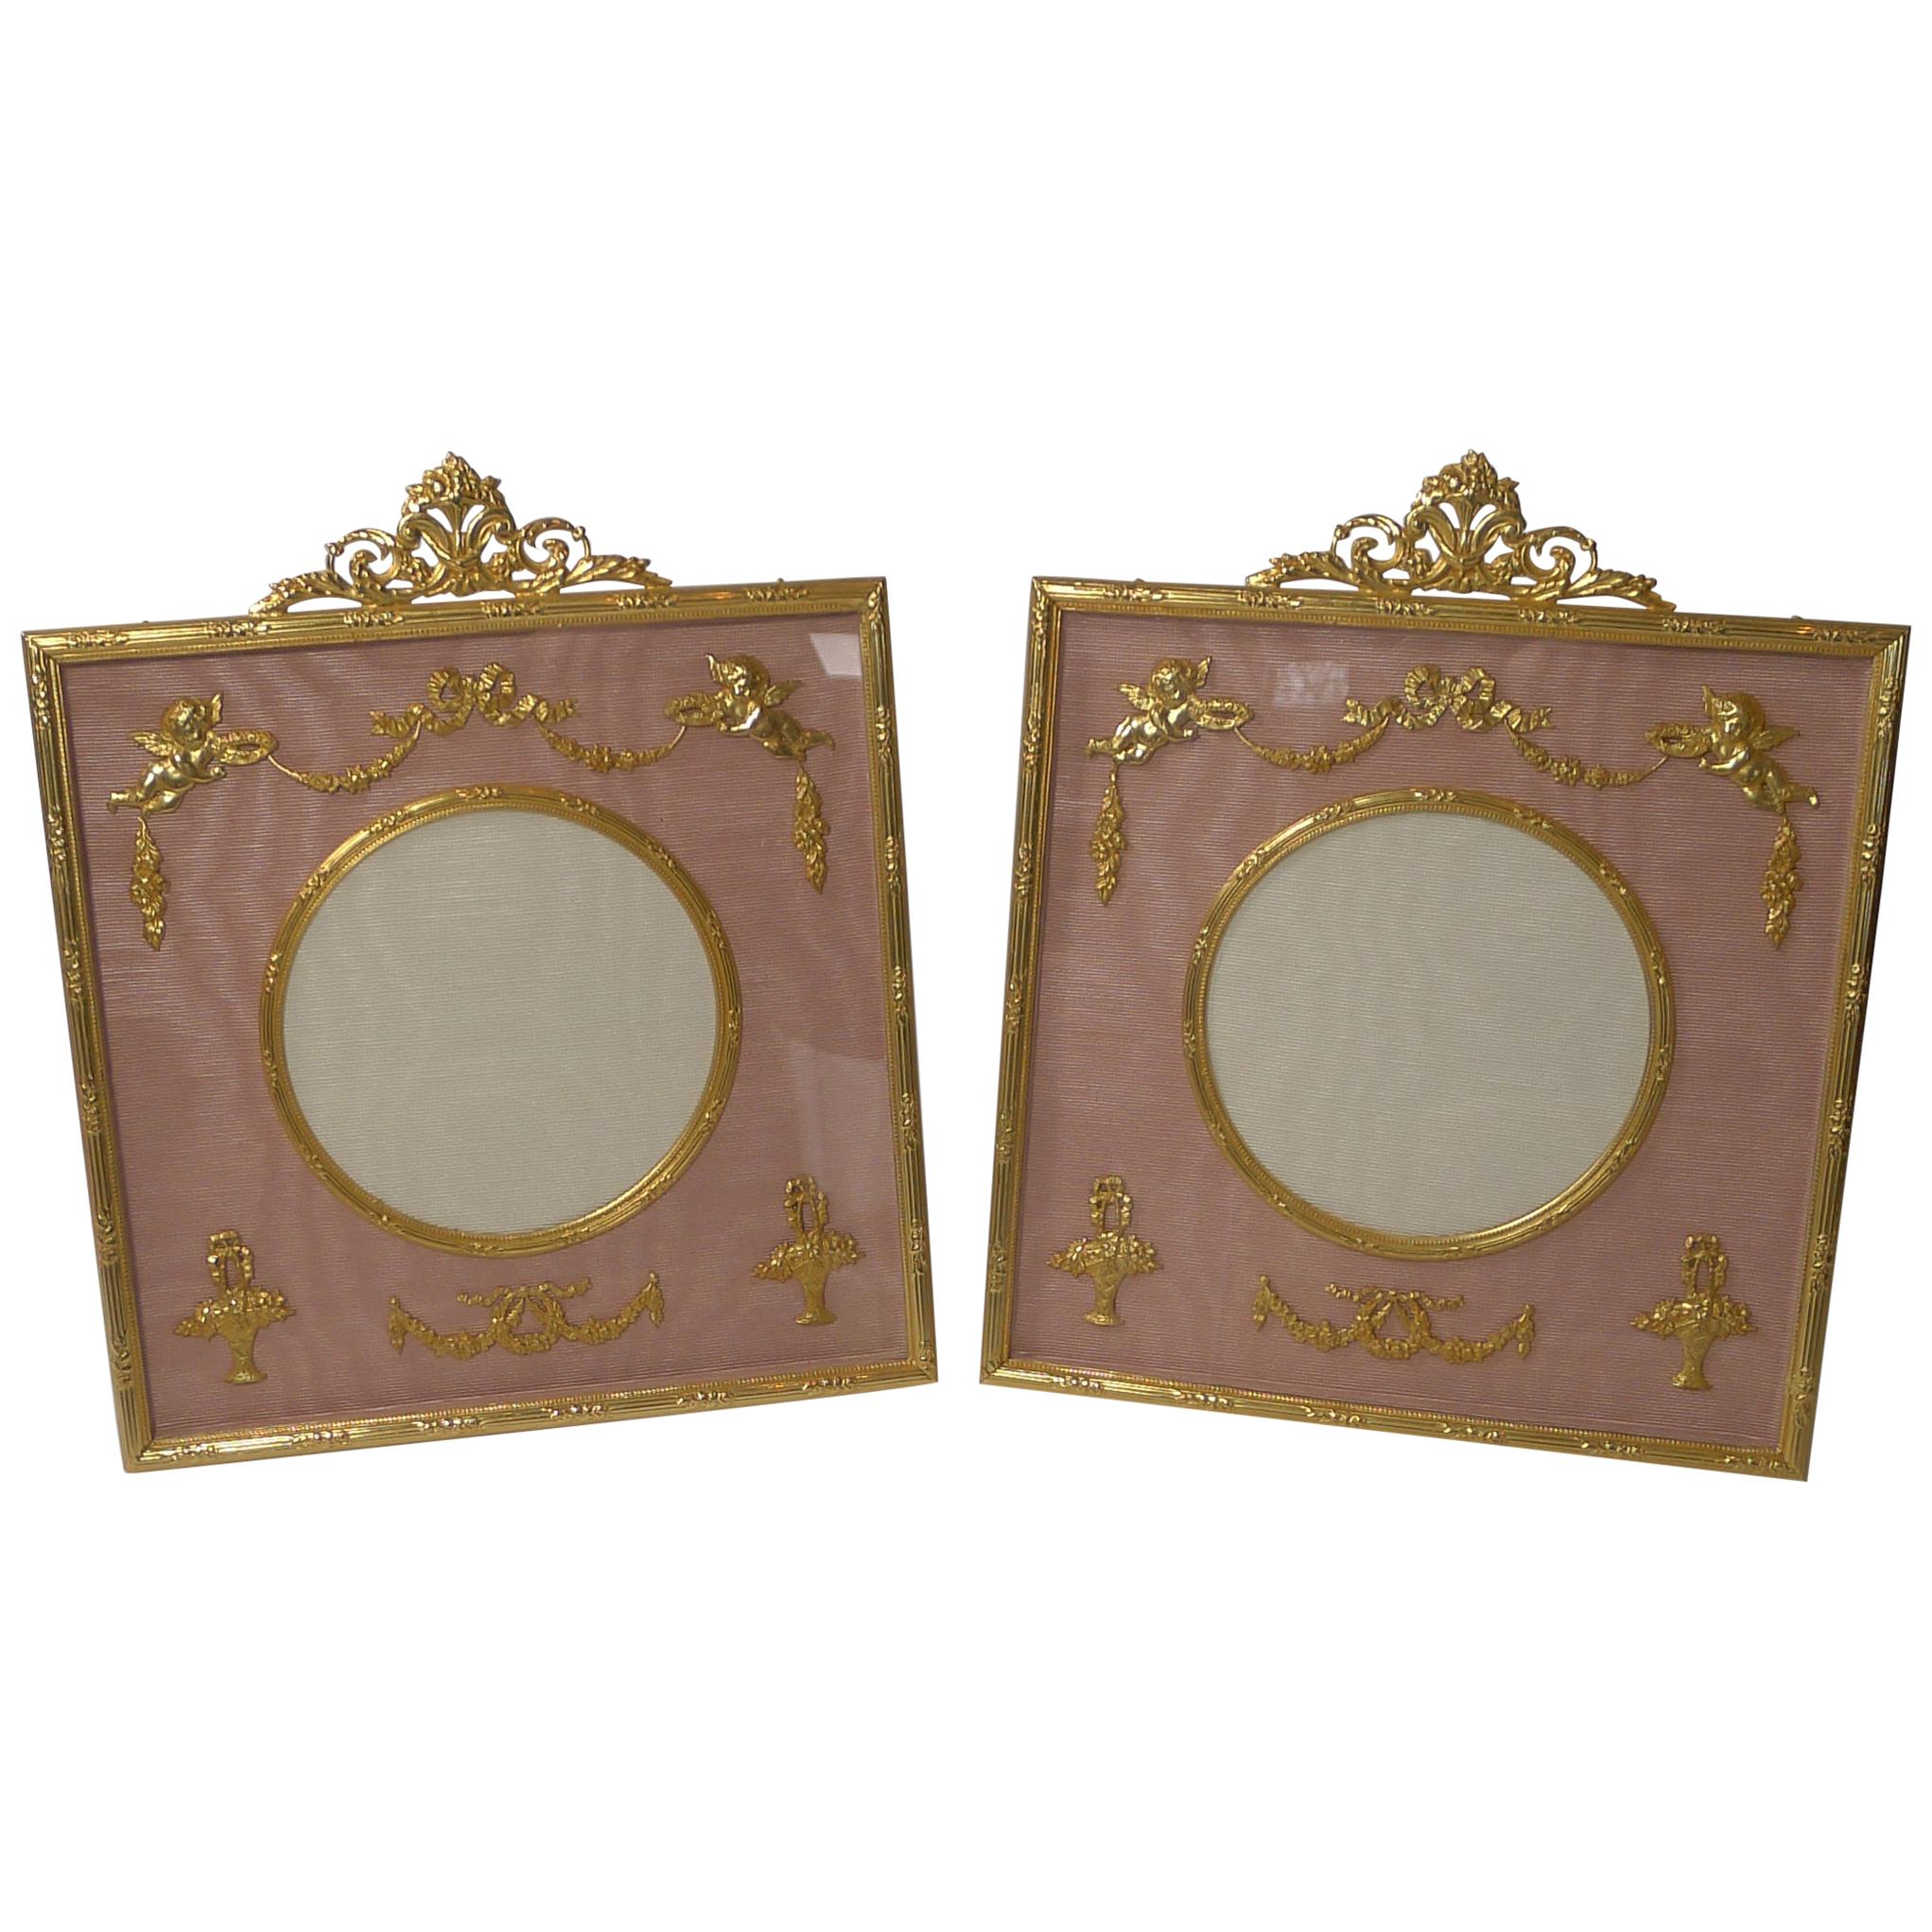 Stunning Pair of French Gilded Bronze Picture Frames, Cherubs